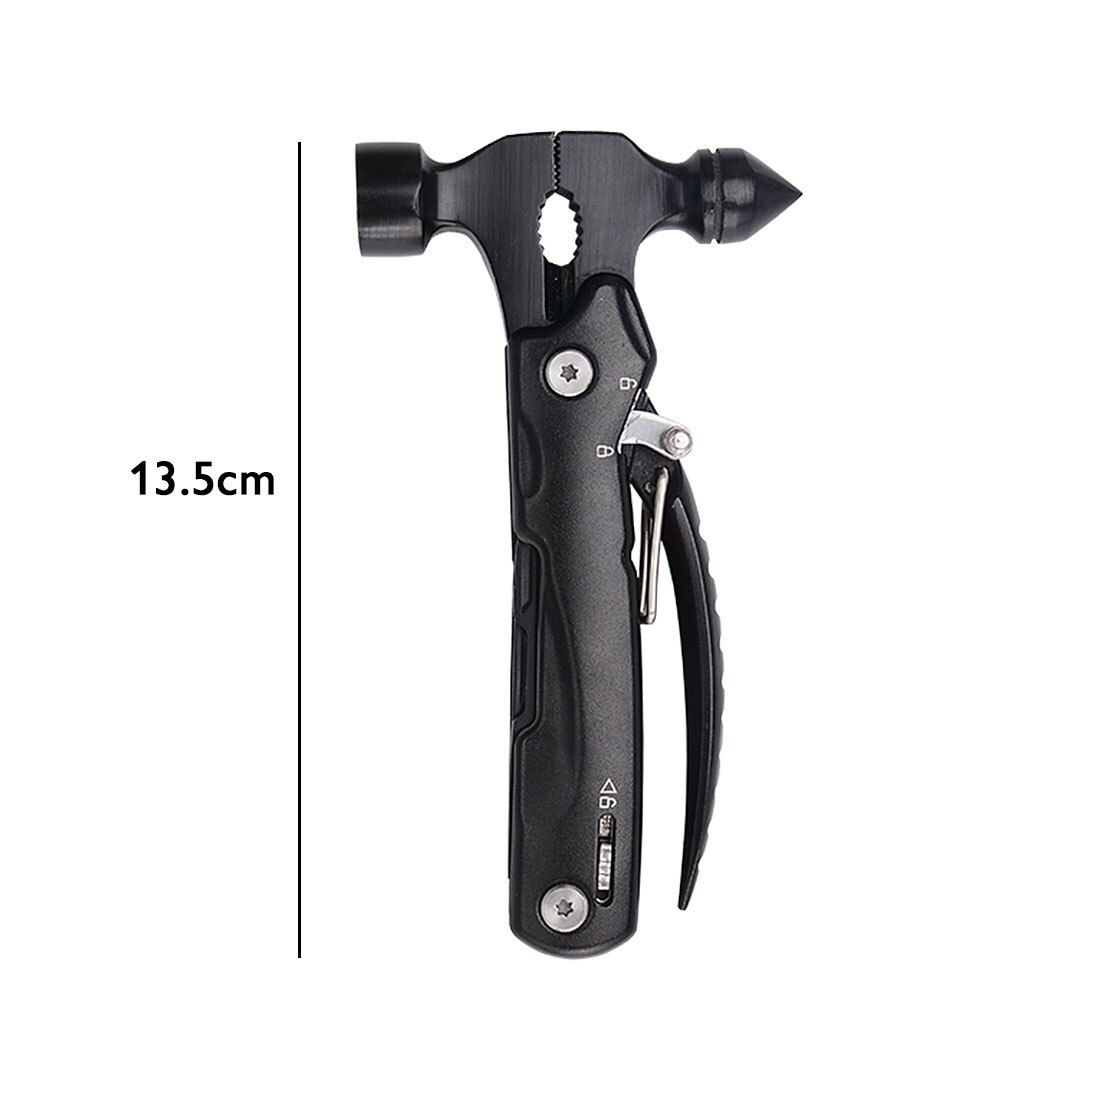 Auto Safety Hammer Multifunctional Nail Hammer Escape Hammer Outdoor Tool Self-rescue Tool for Outdoor Survival Camping Hiking